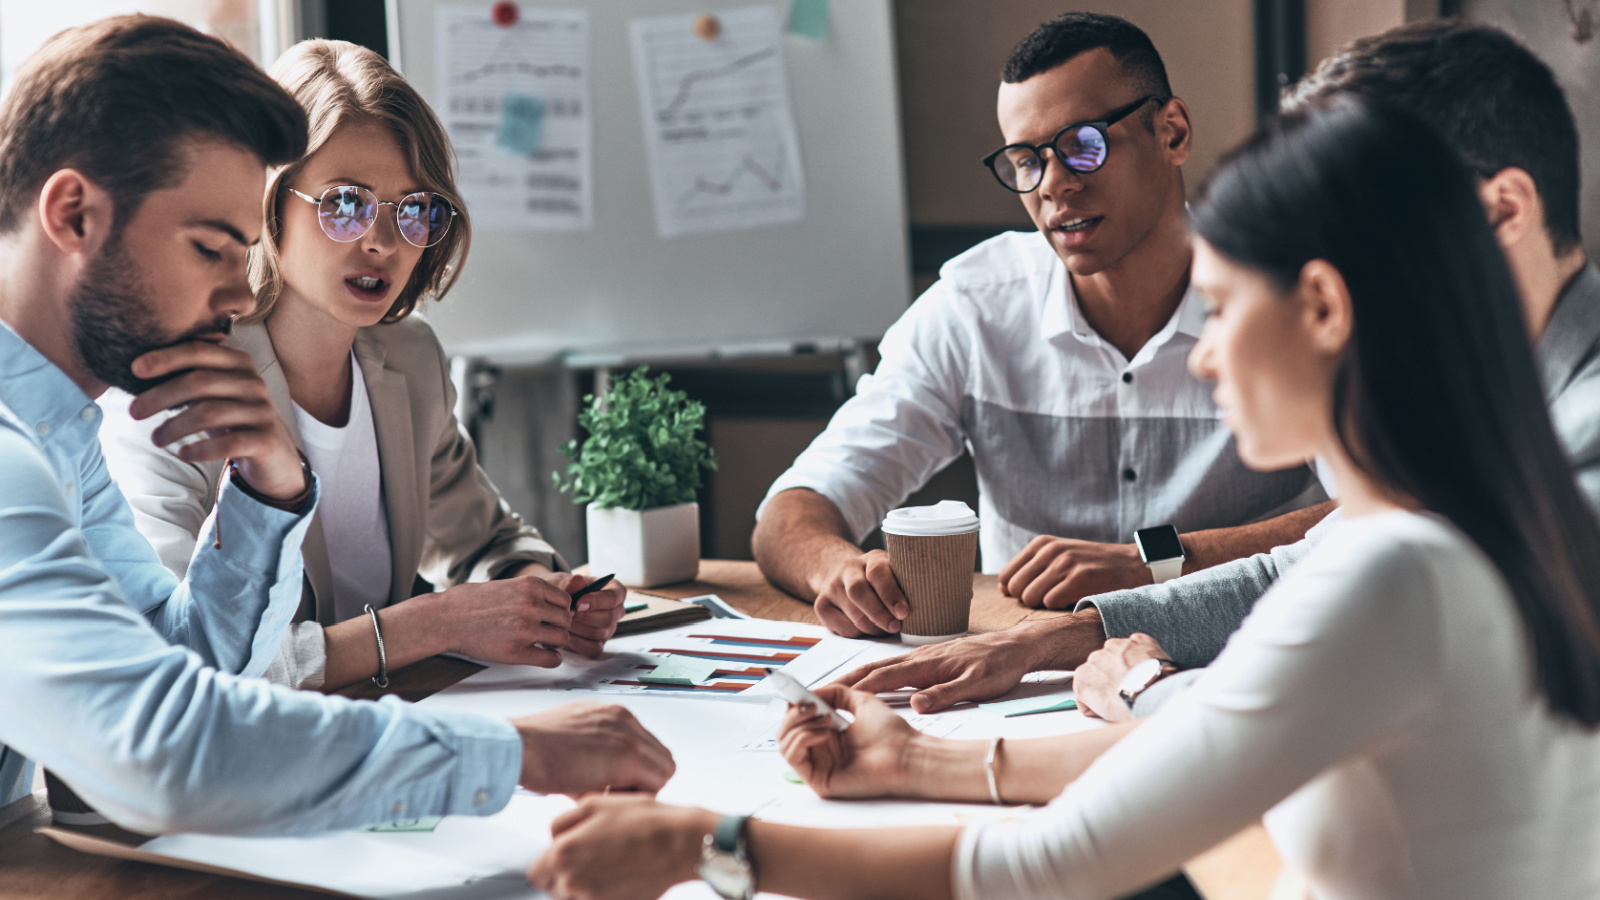 image credit: g-stock-studio/shutterstock <p><span>Diversity and inclusion have moved to the forefront of company policies. There’s an increased effort to hire from diverse backgrounds, ensuring a variety of perspectives and fostering a more creative and inclusive work environment.</span></p>